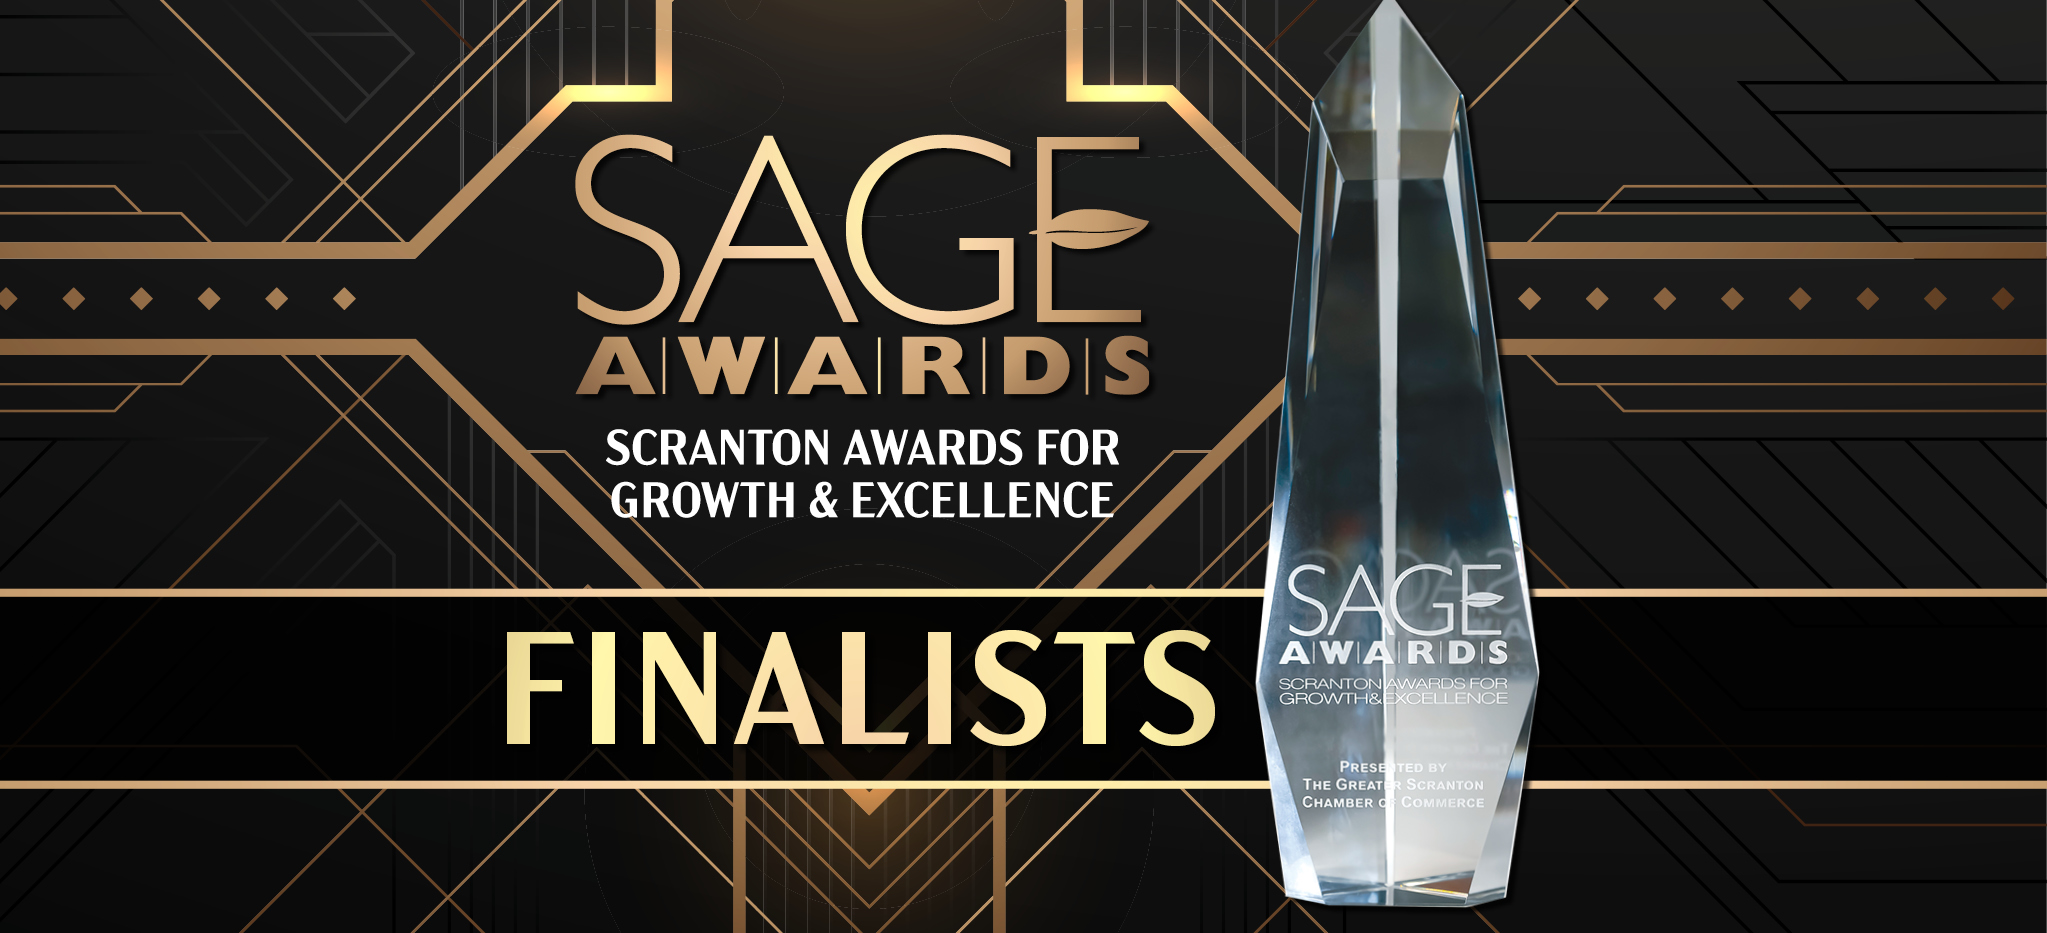 The Chamber Announces the 2022 SAGE Awards Finalists